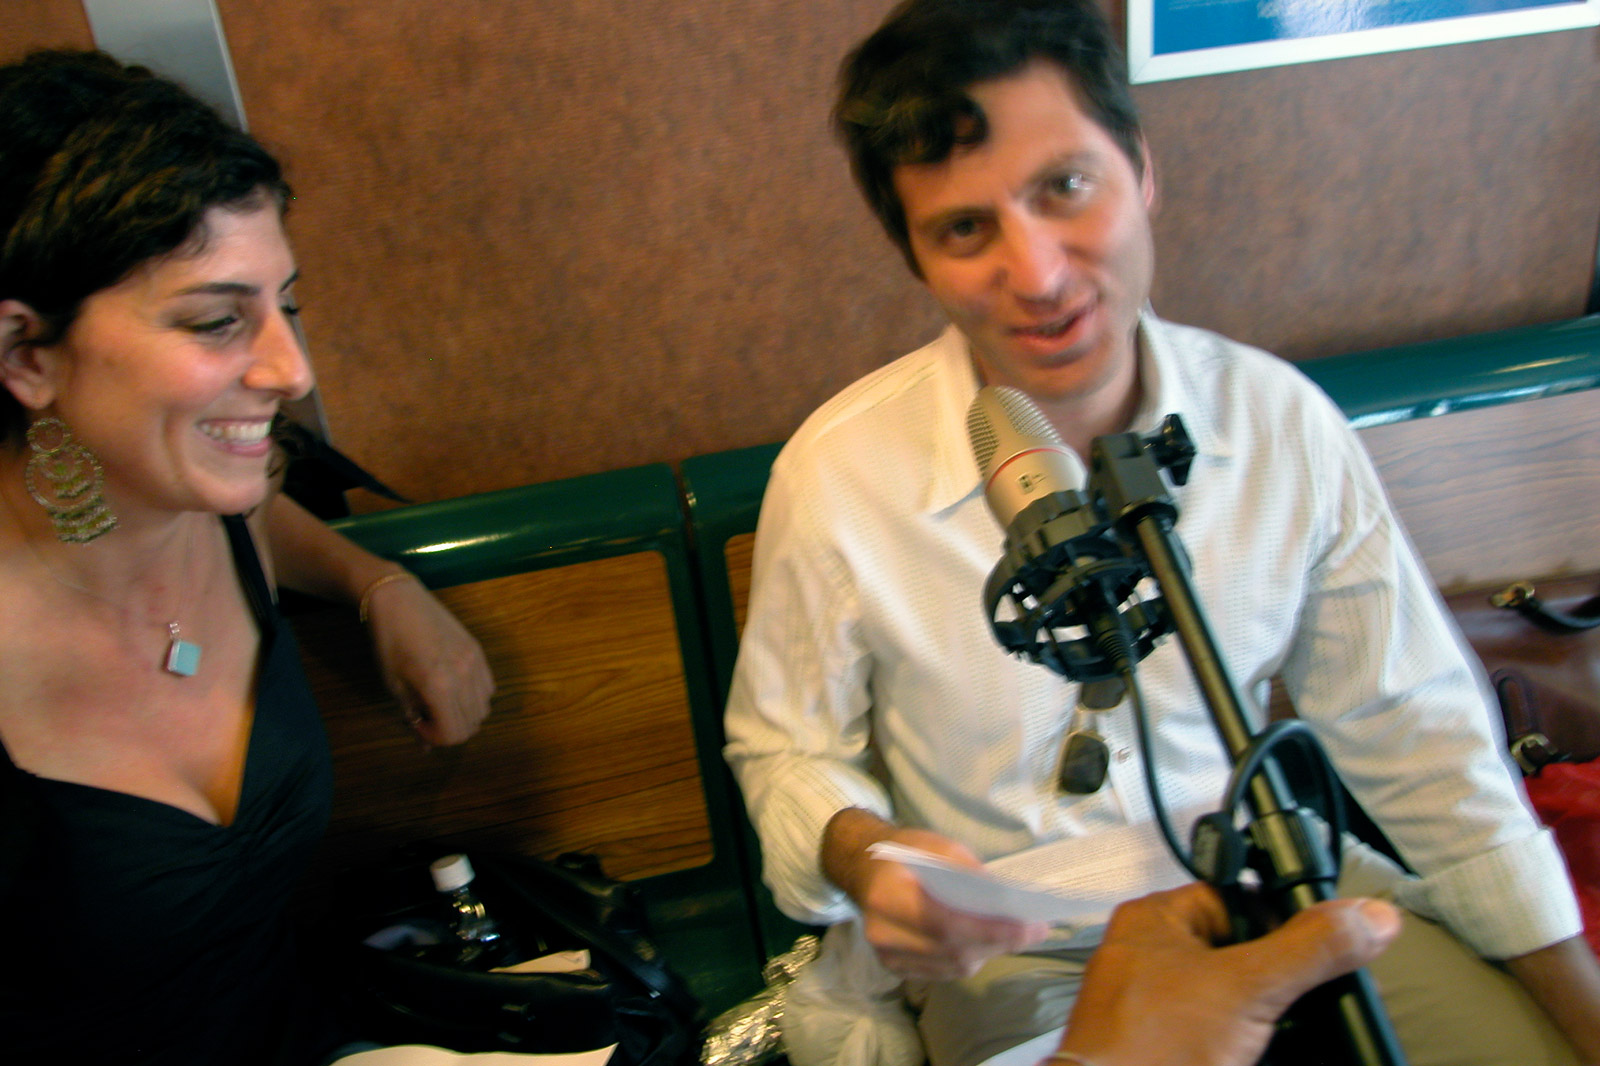 The FM Ferry Experiment studio on the Guy Molinari Staten Island Ferry. Image features (left to right) on-air guests – Emily Jacir and Jamal Rayyis.